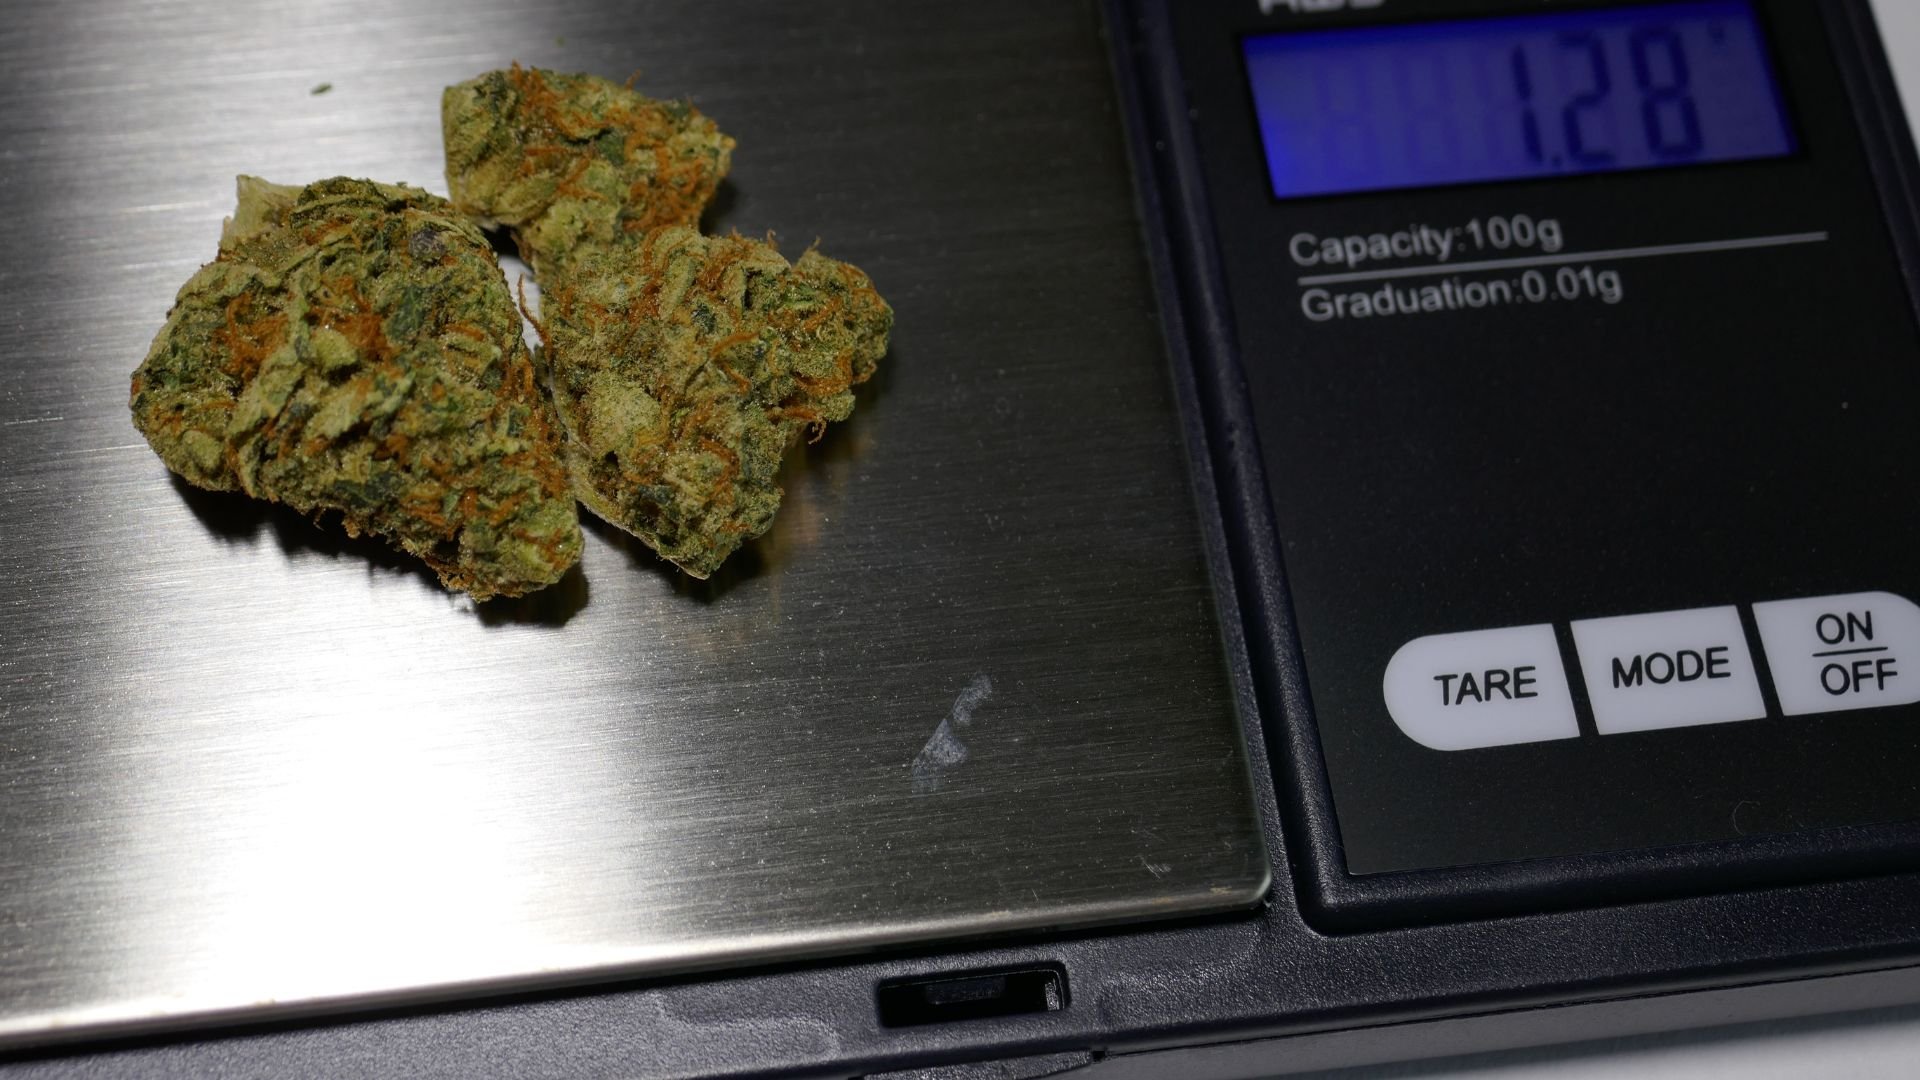 The Most Common Weed Measurements Explained